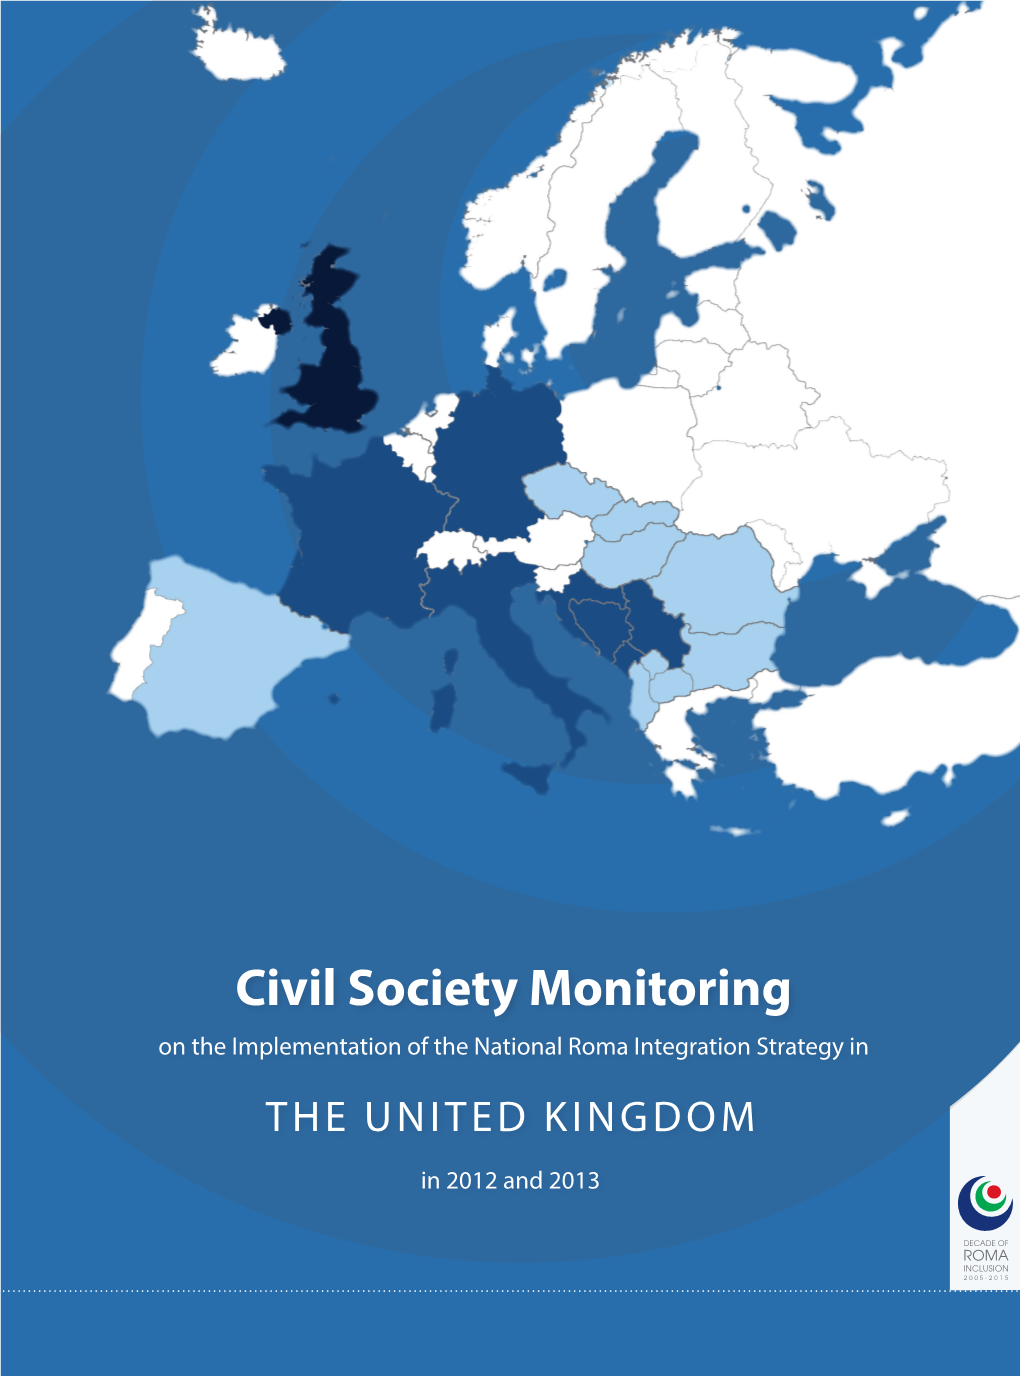 Civil Society Monitoring on the Implementation of the National Roma Integration Strategy in the UNITED KINGDOM